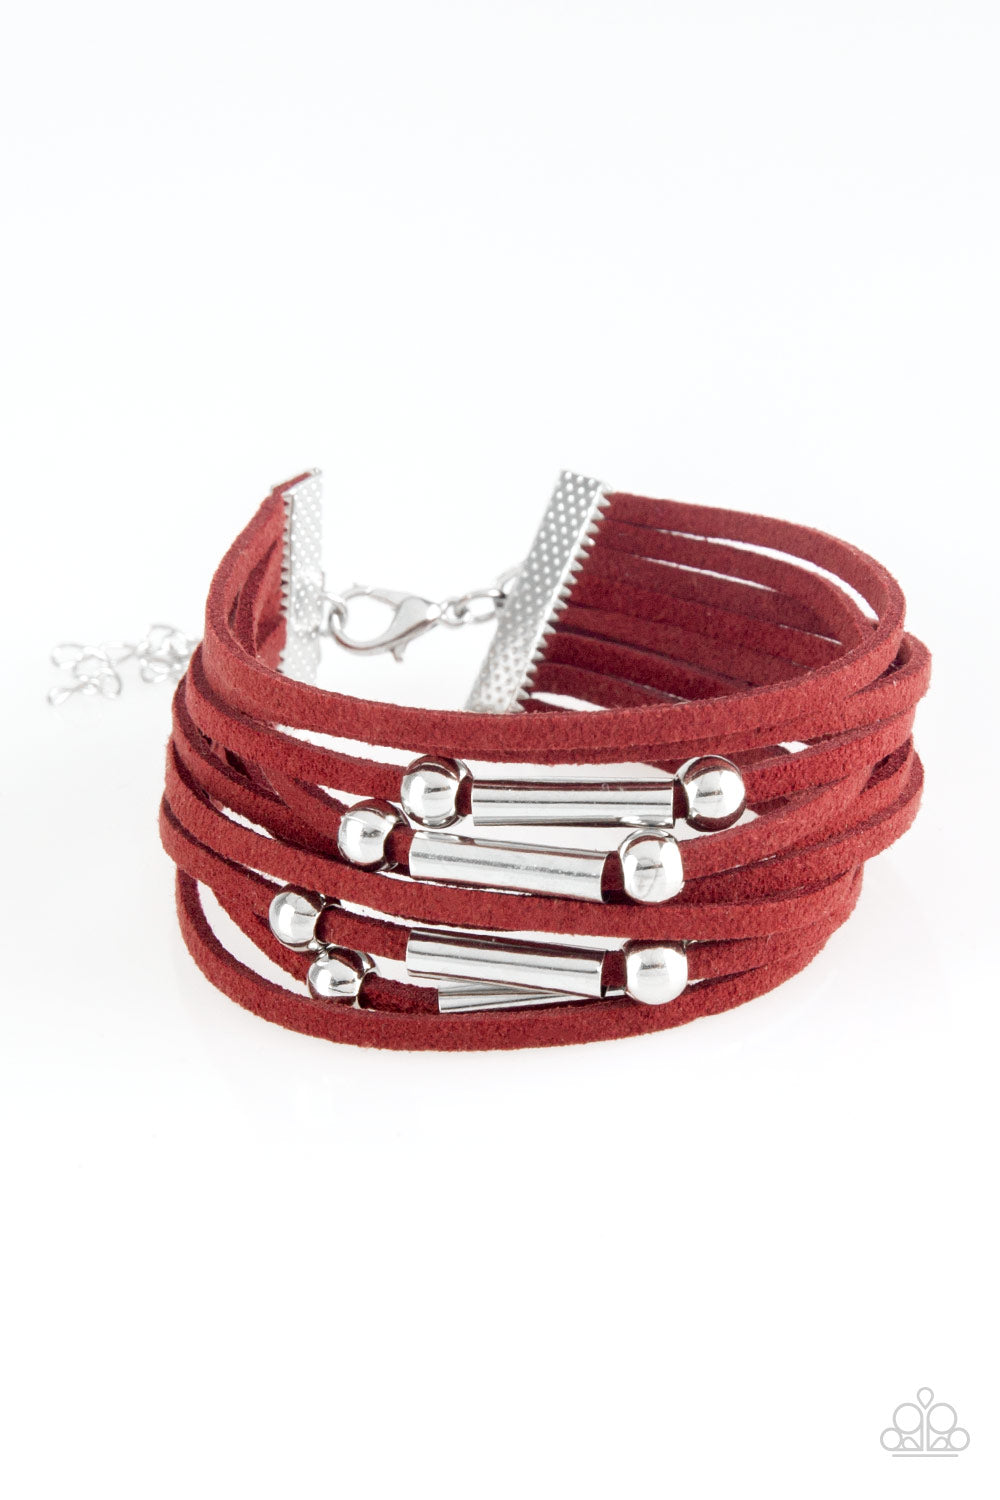 Paparazzi Accessories Red Bracelet with silver beads through the leatherlike strands. Claw hook clamp.